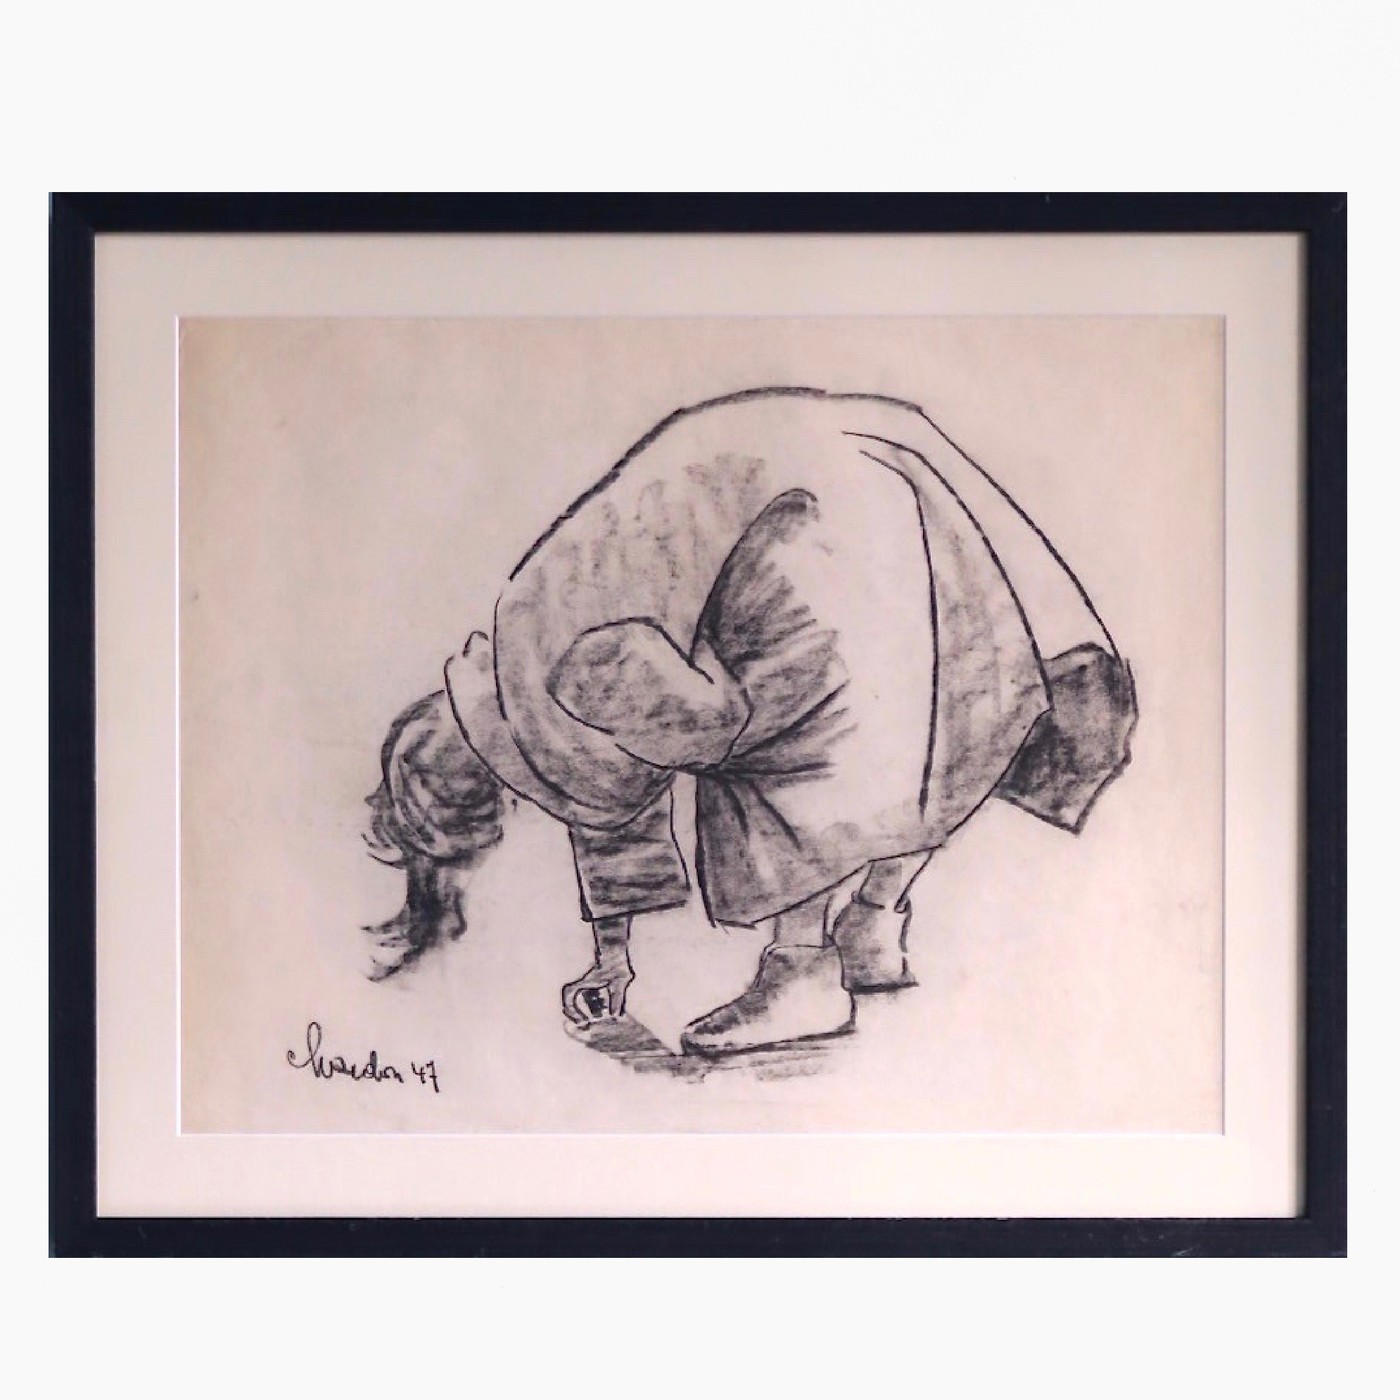 Looking for gold  , Charcoal drawing on paper, signed 1947